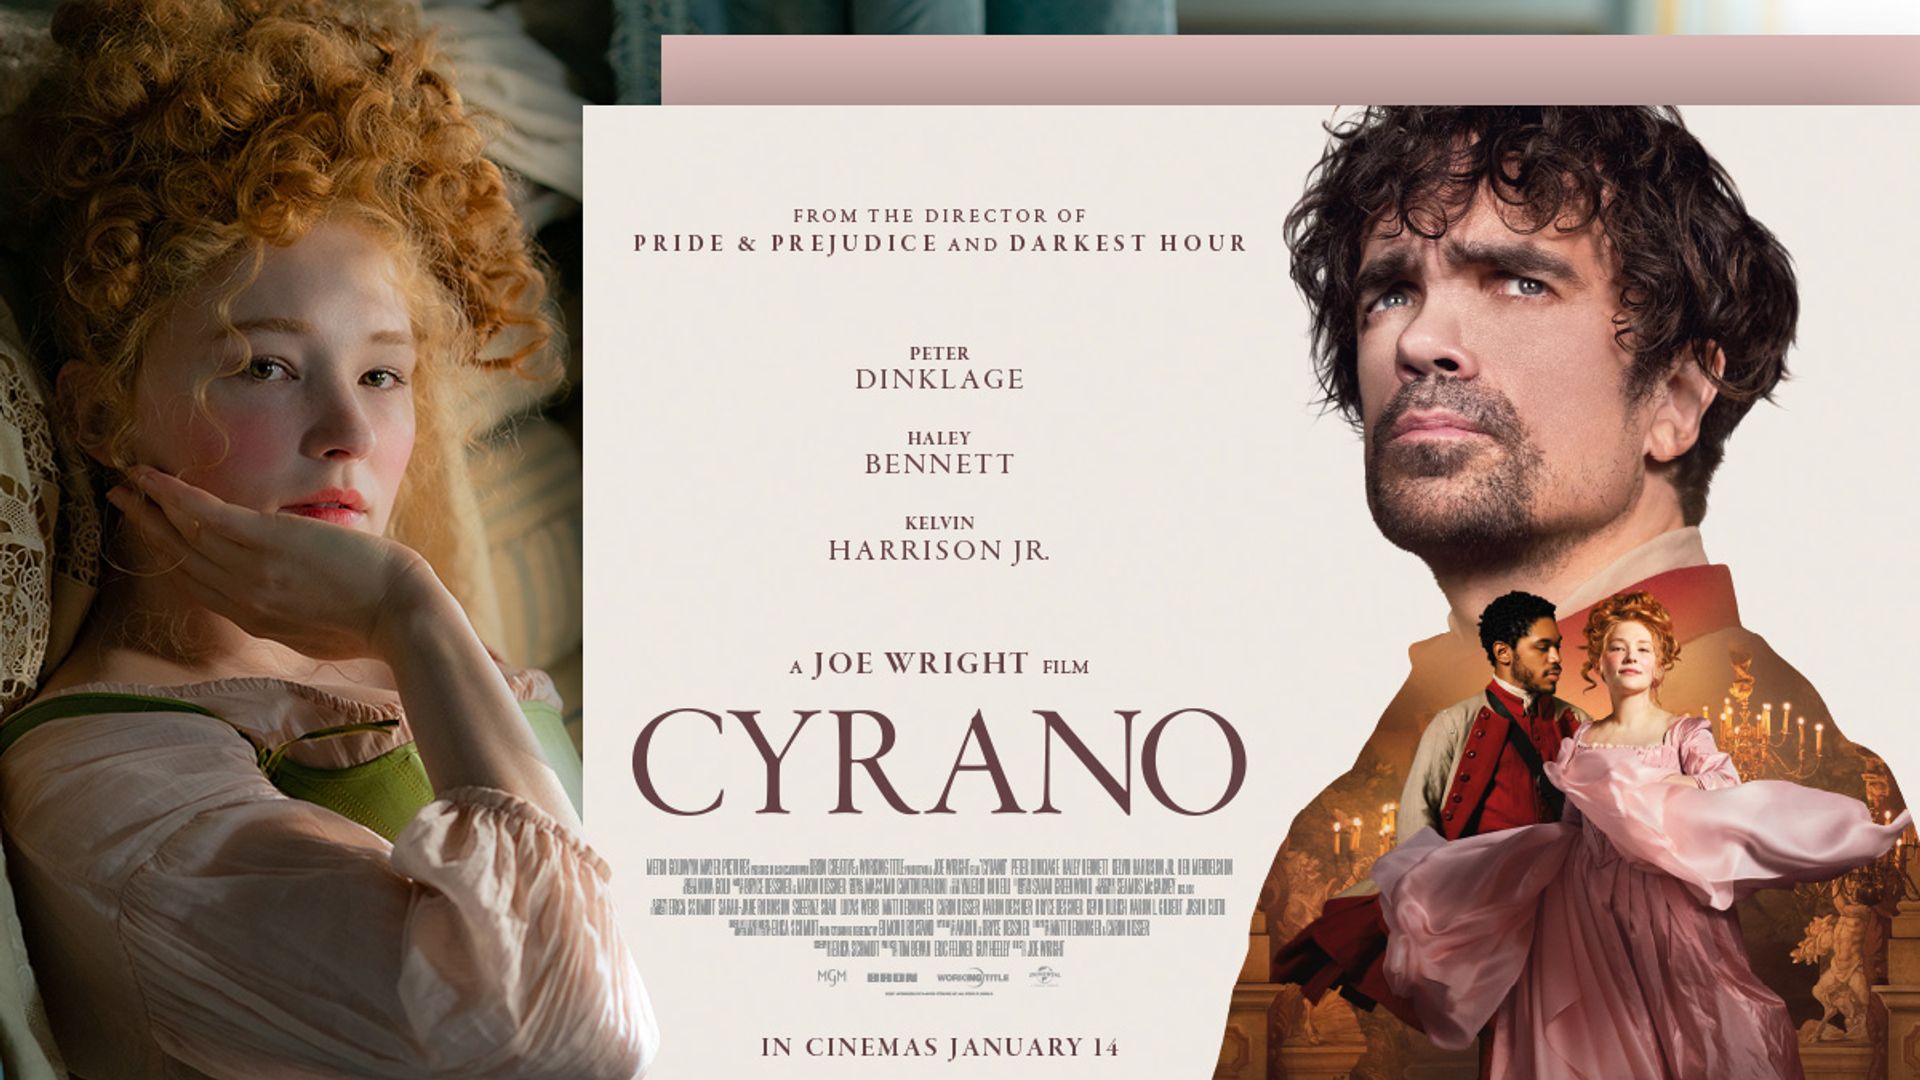 Peter Dinklage stars in breathtaking new musical film, CYRANO - and you’re invited to our special preview screening